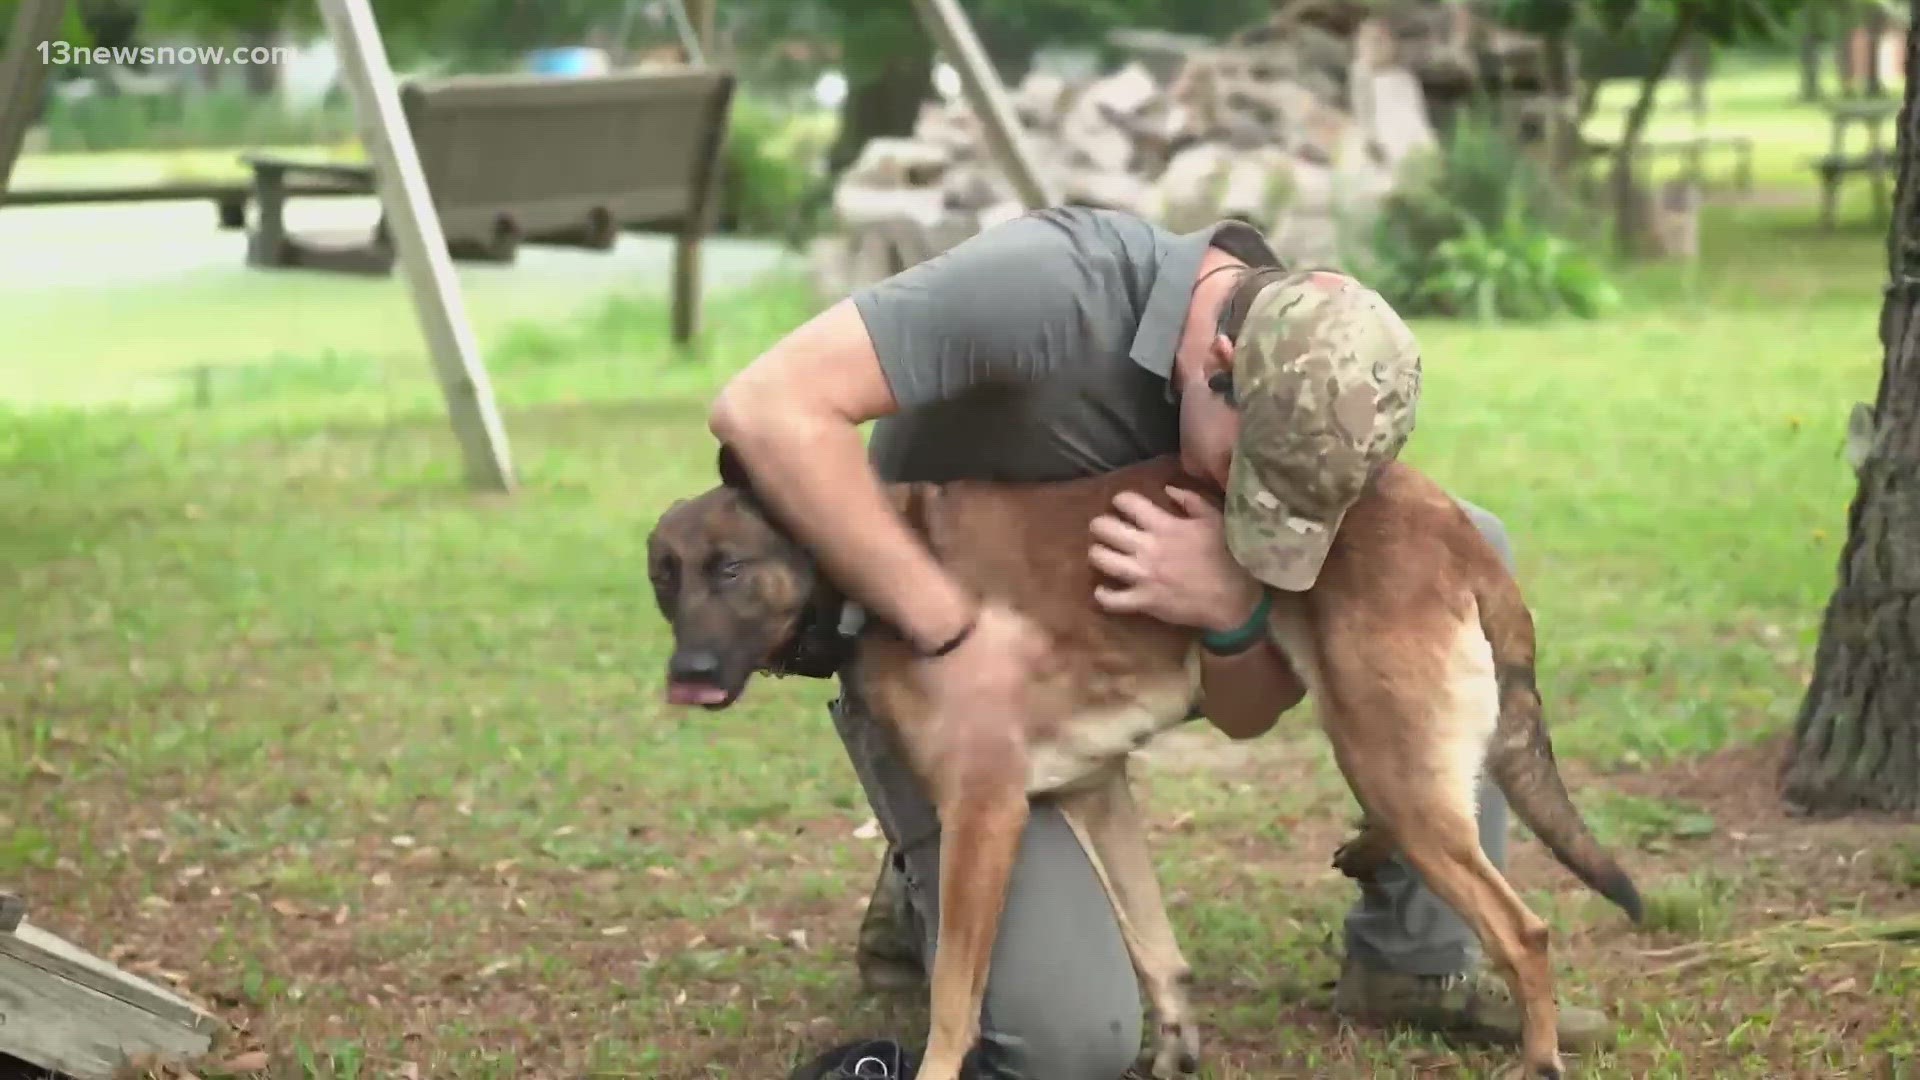 Frog Dog K9 is a nonprofit that connects military veterans with retired service dogs. They provide protection, assistance, trust, and companionship to each other.